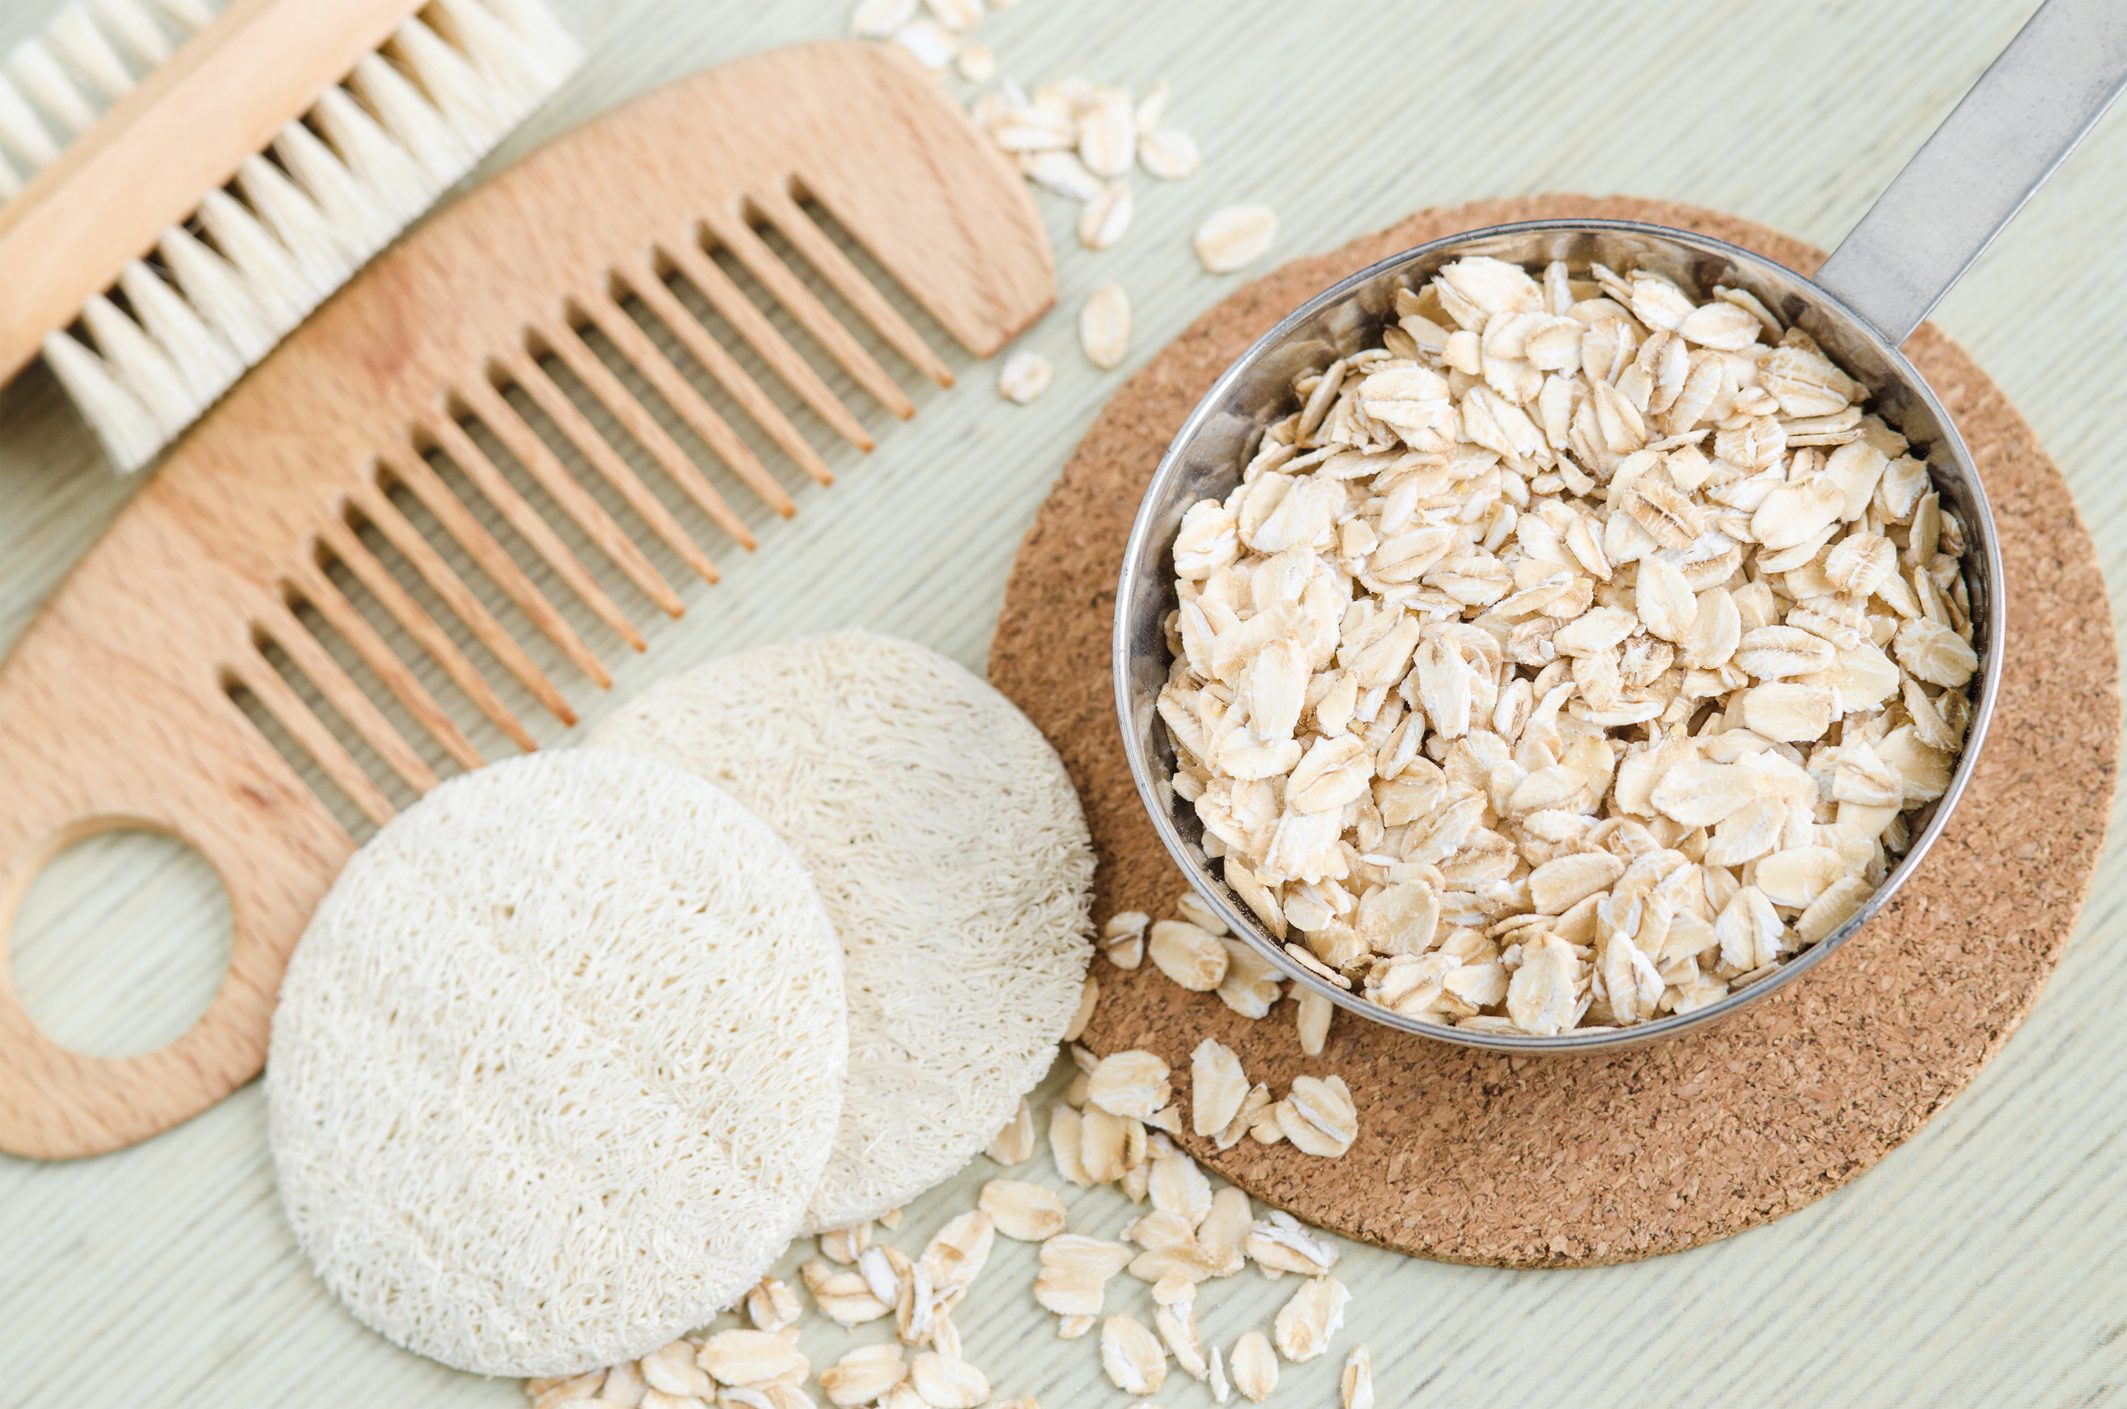 Rolled oats in a small bowl for preparing homemade facial mask and scrub. DIY oatmeal cosmetics.